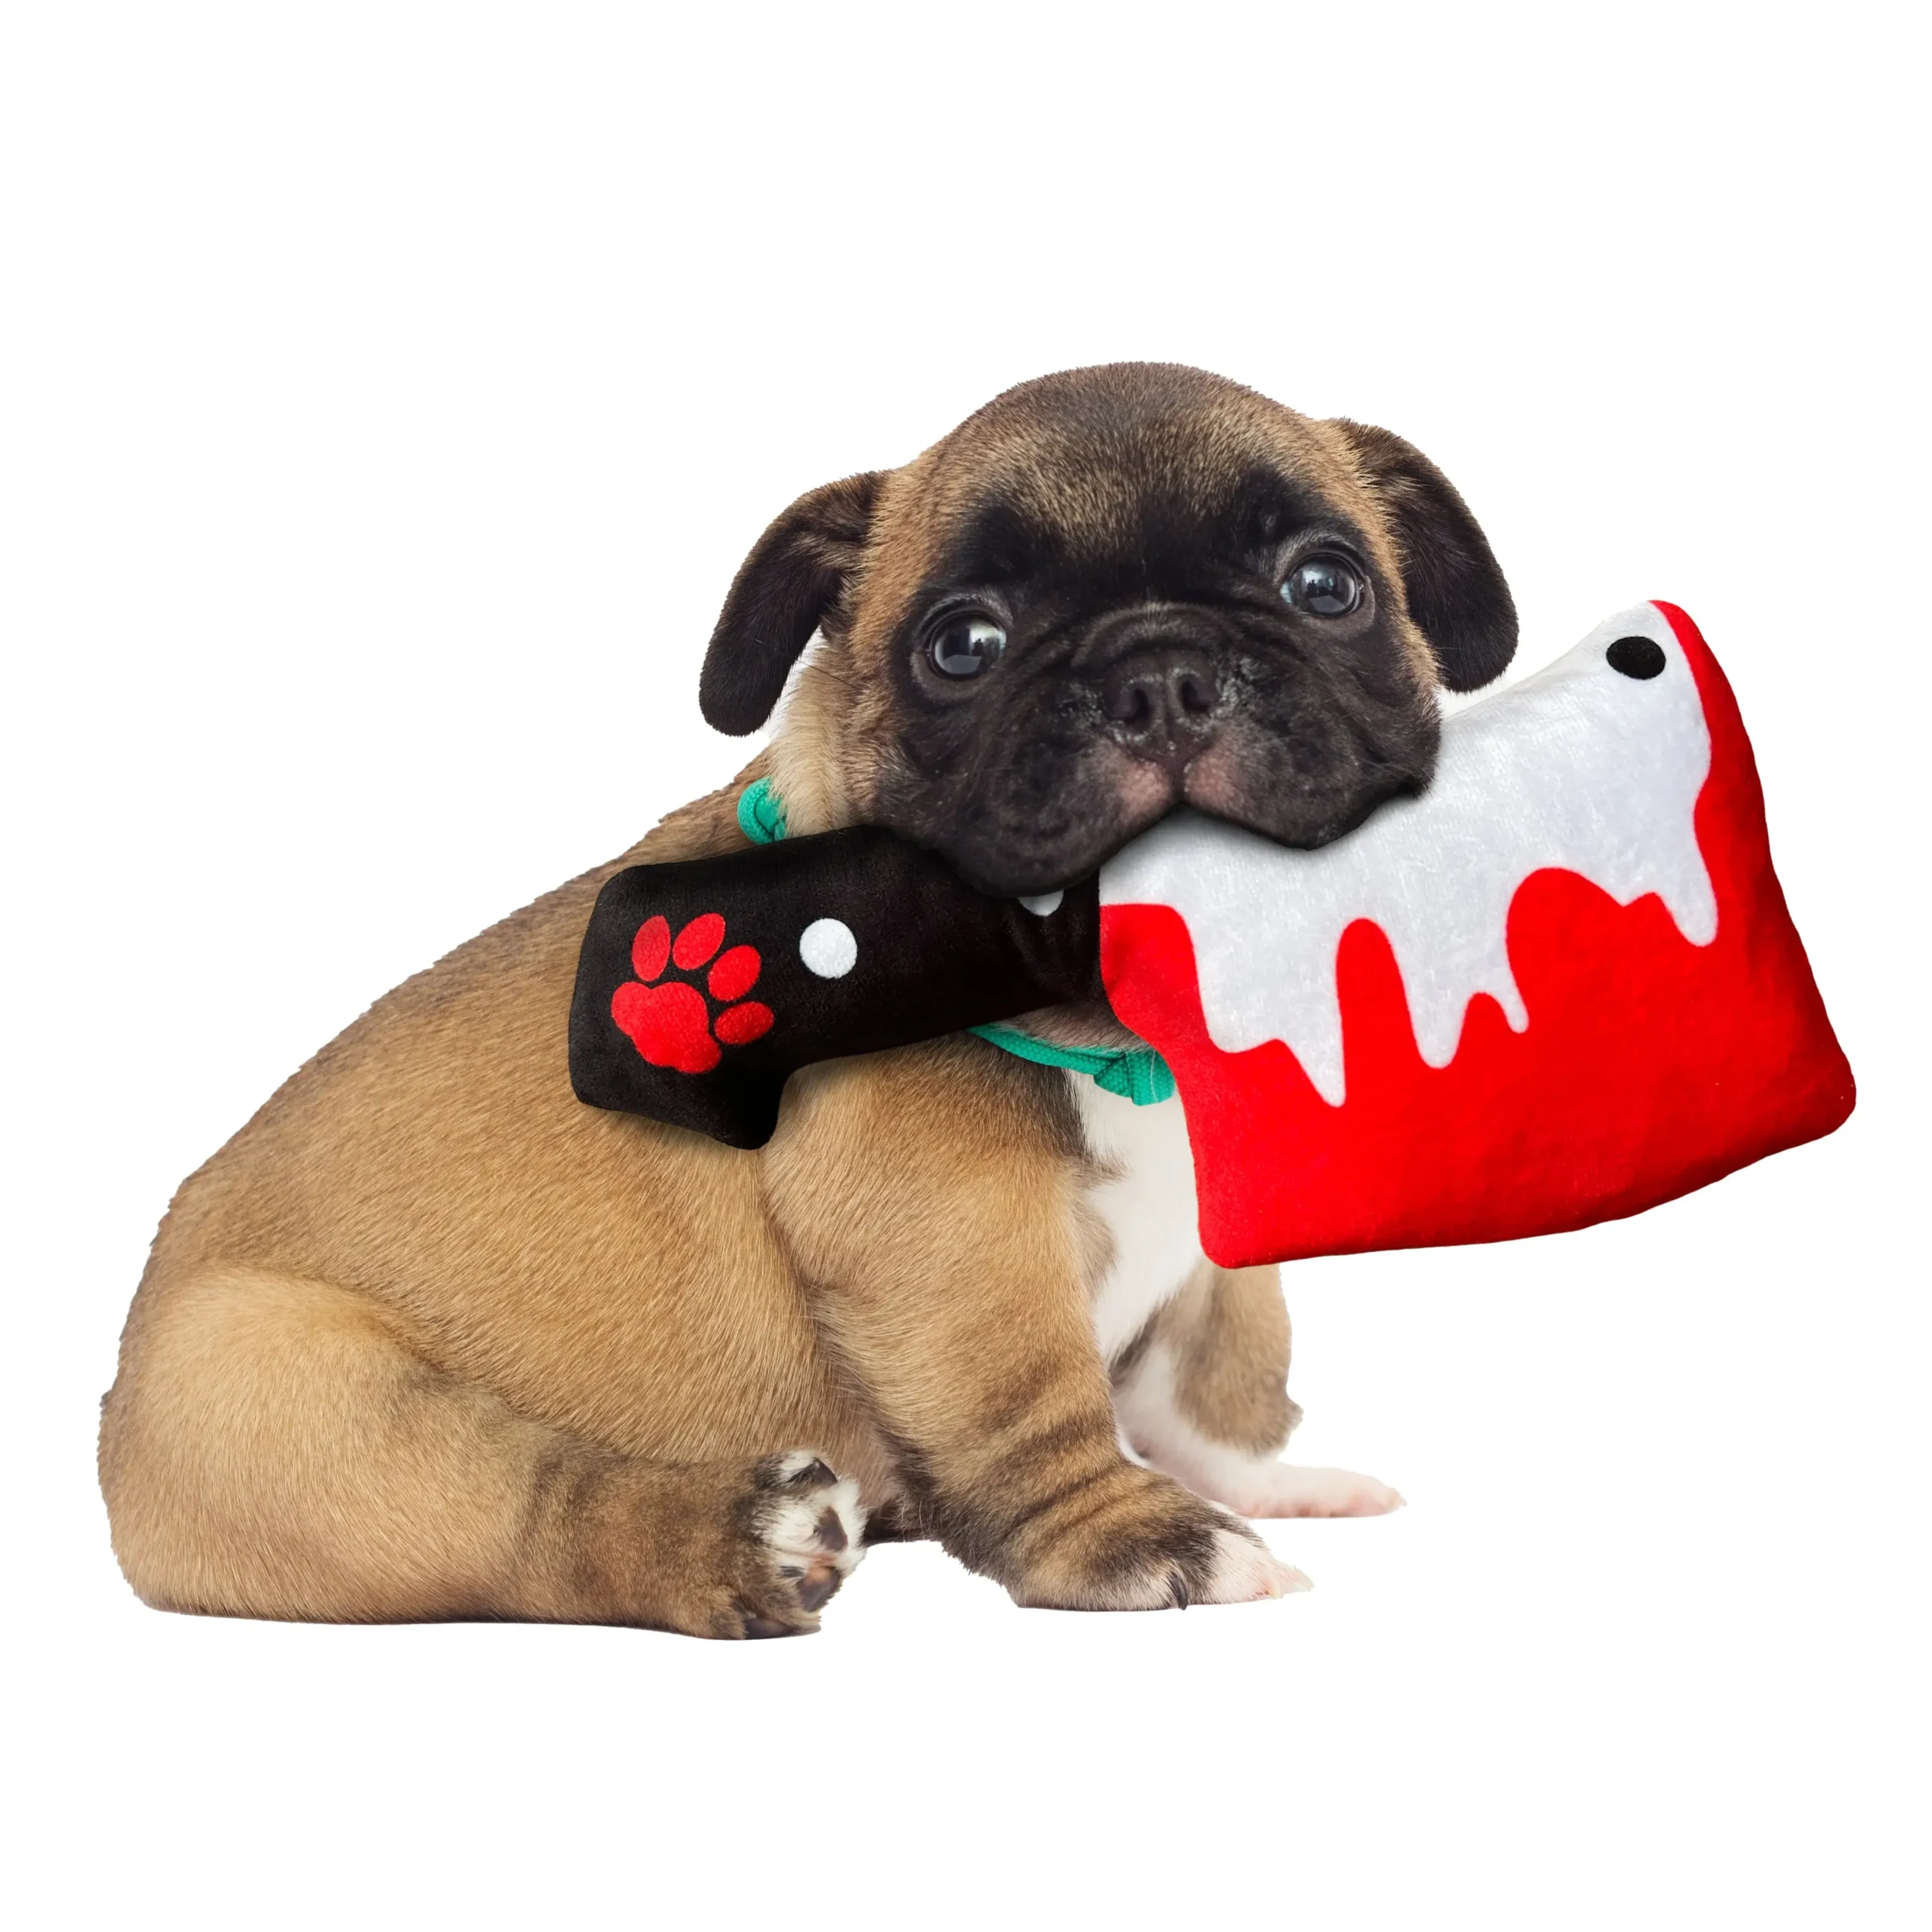 Which Cute Dog Toy is Right for Your Pup?